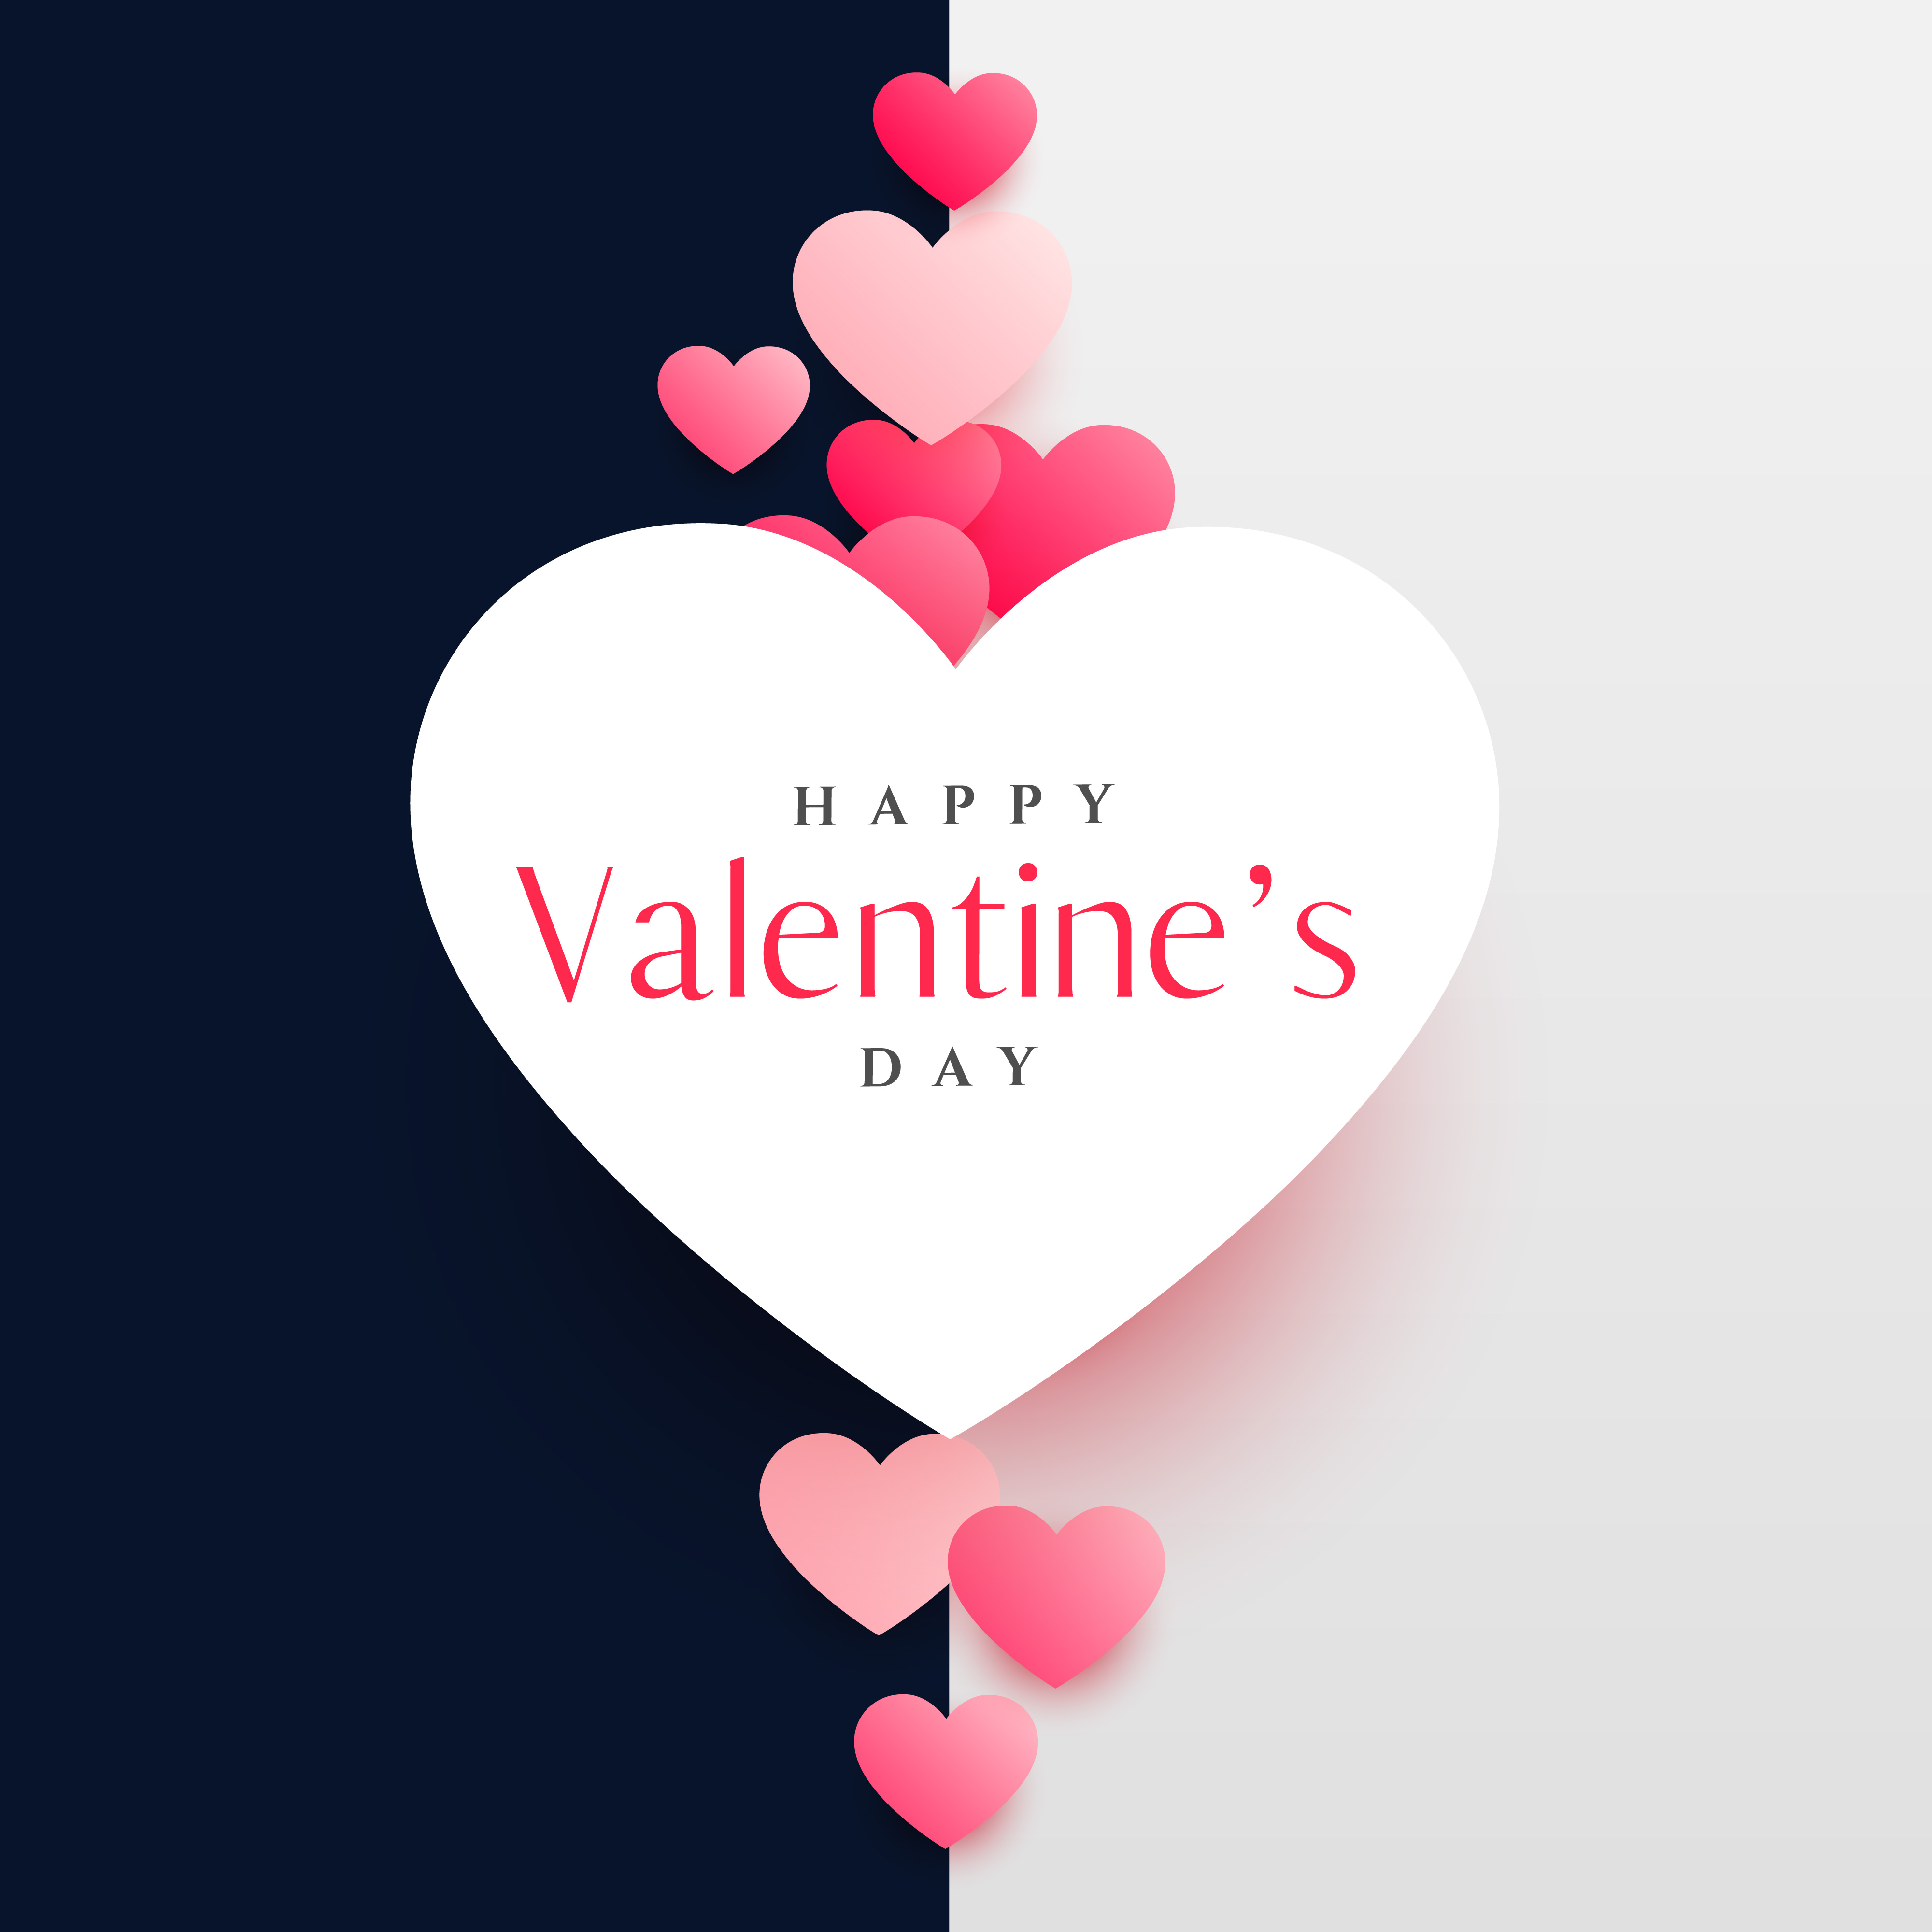 modern-happy-valentine-s-day-greeting-card-design-template-download